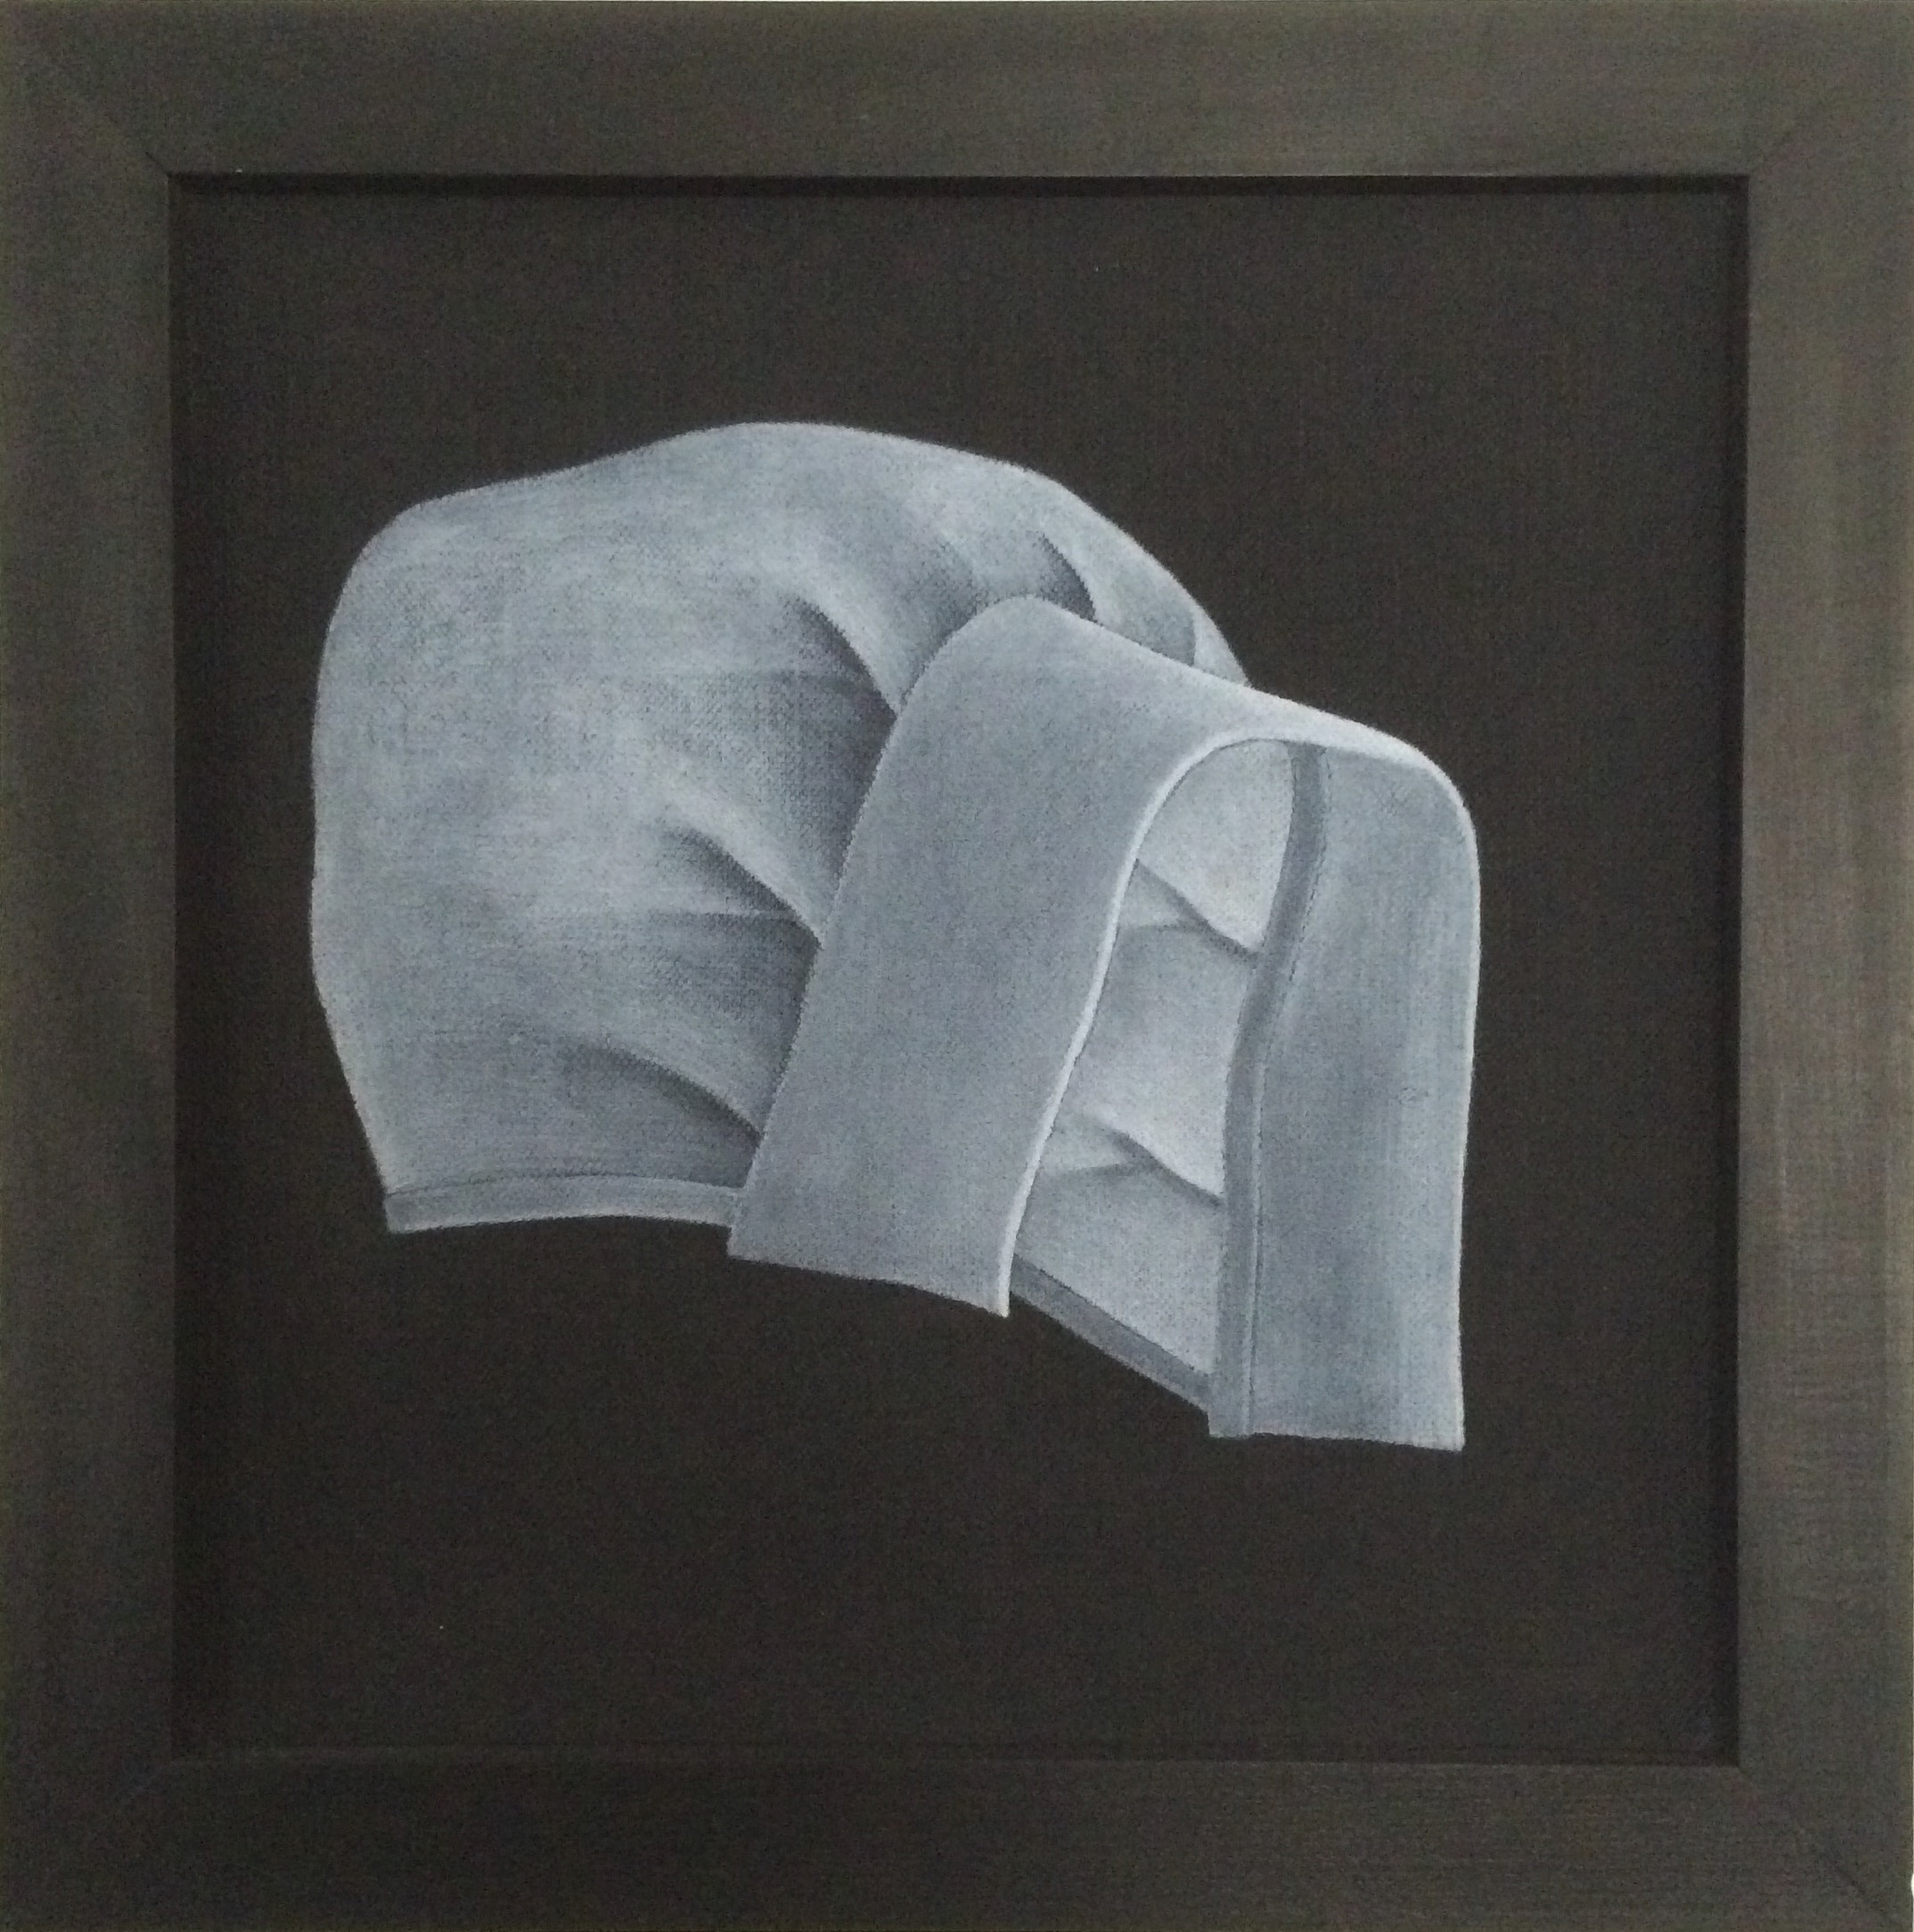    Bonnet,   1991 Pigment, acrylic polymer, and gesso on linen-mounted panel 